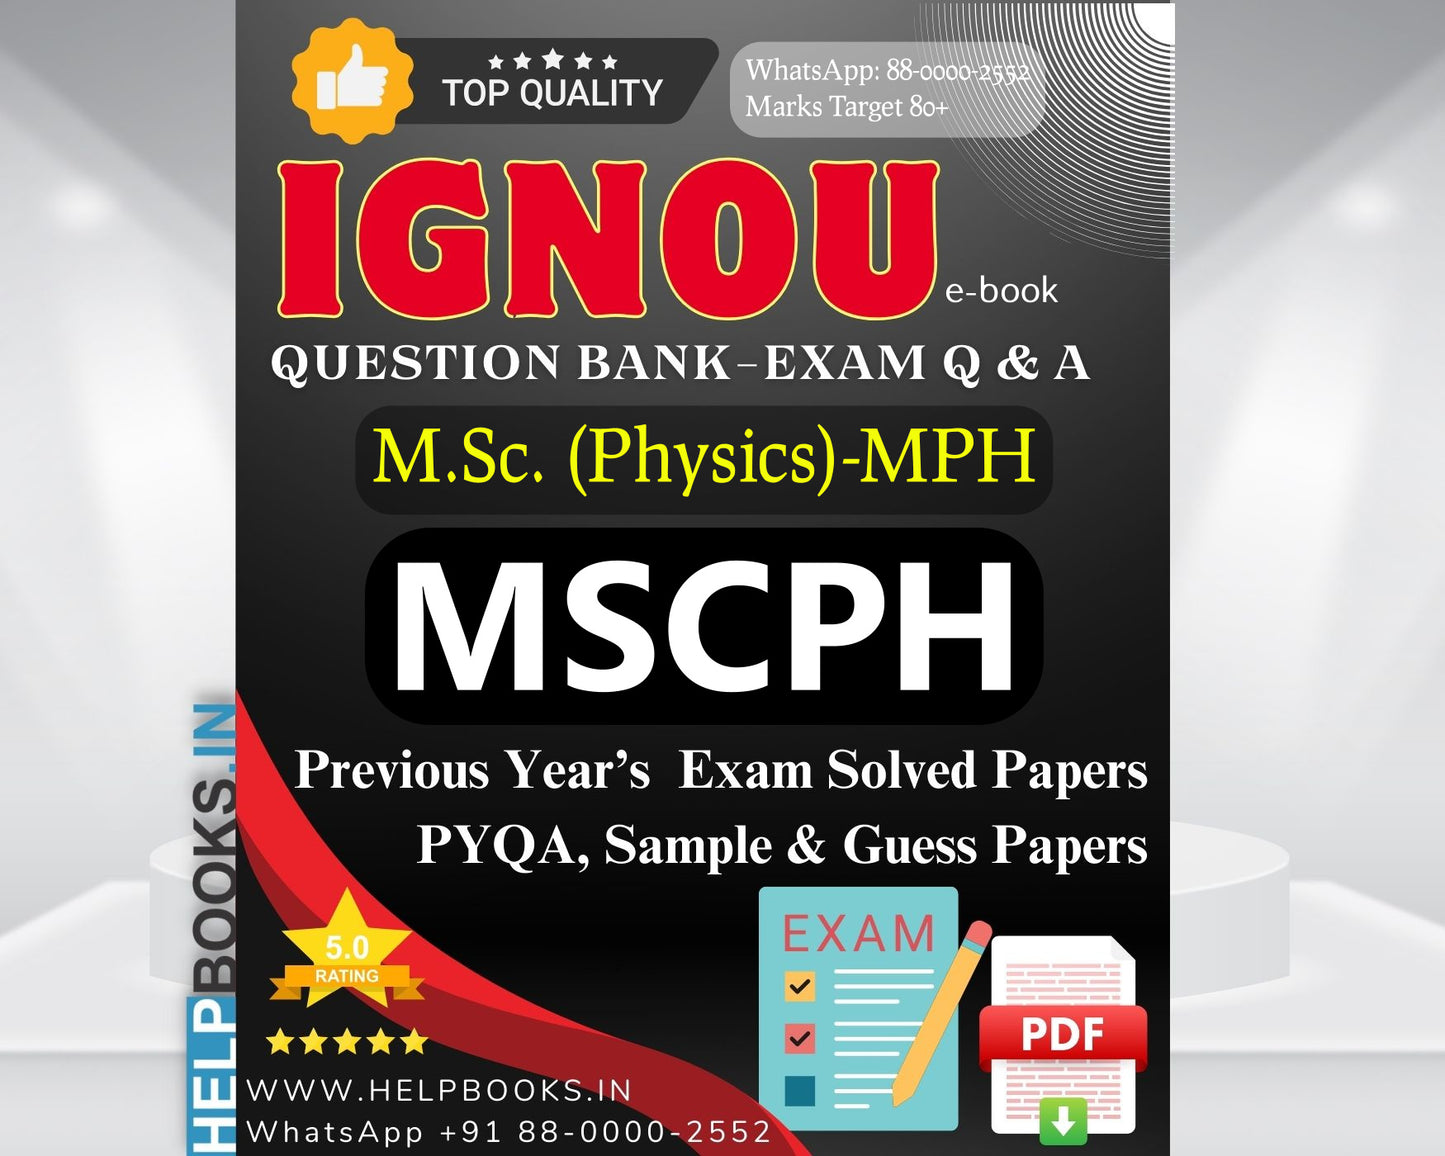 MSCPH IGNOU Exam 5 Sample Guess Papers for Master of Science Physics